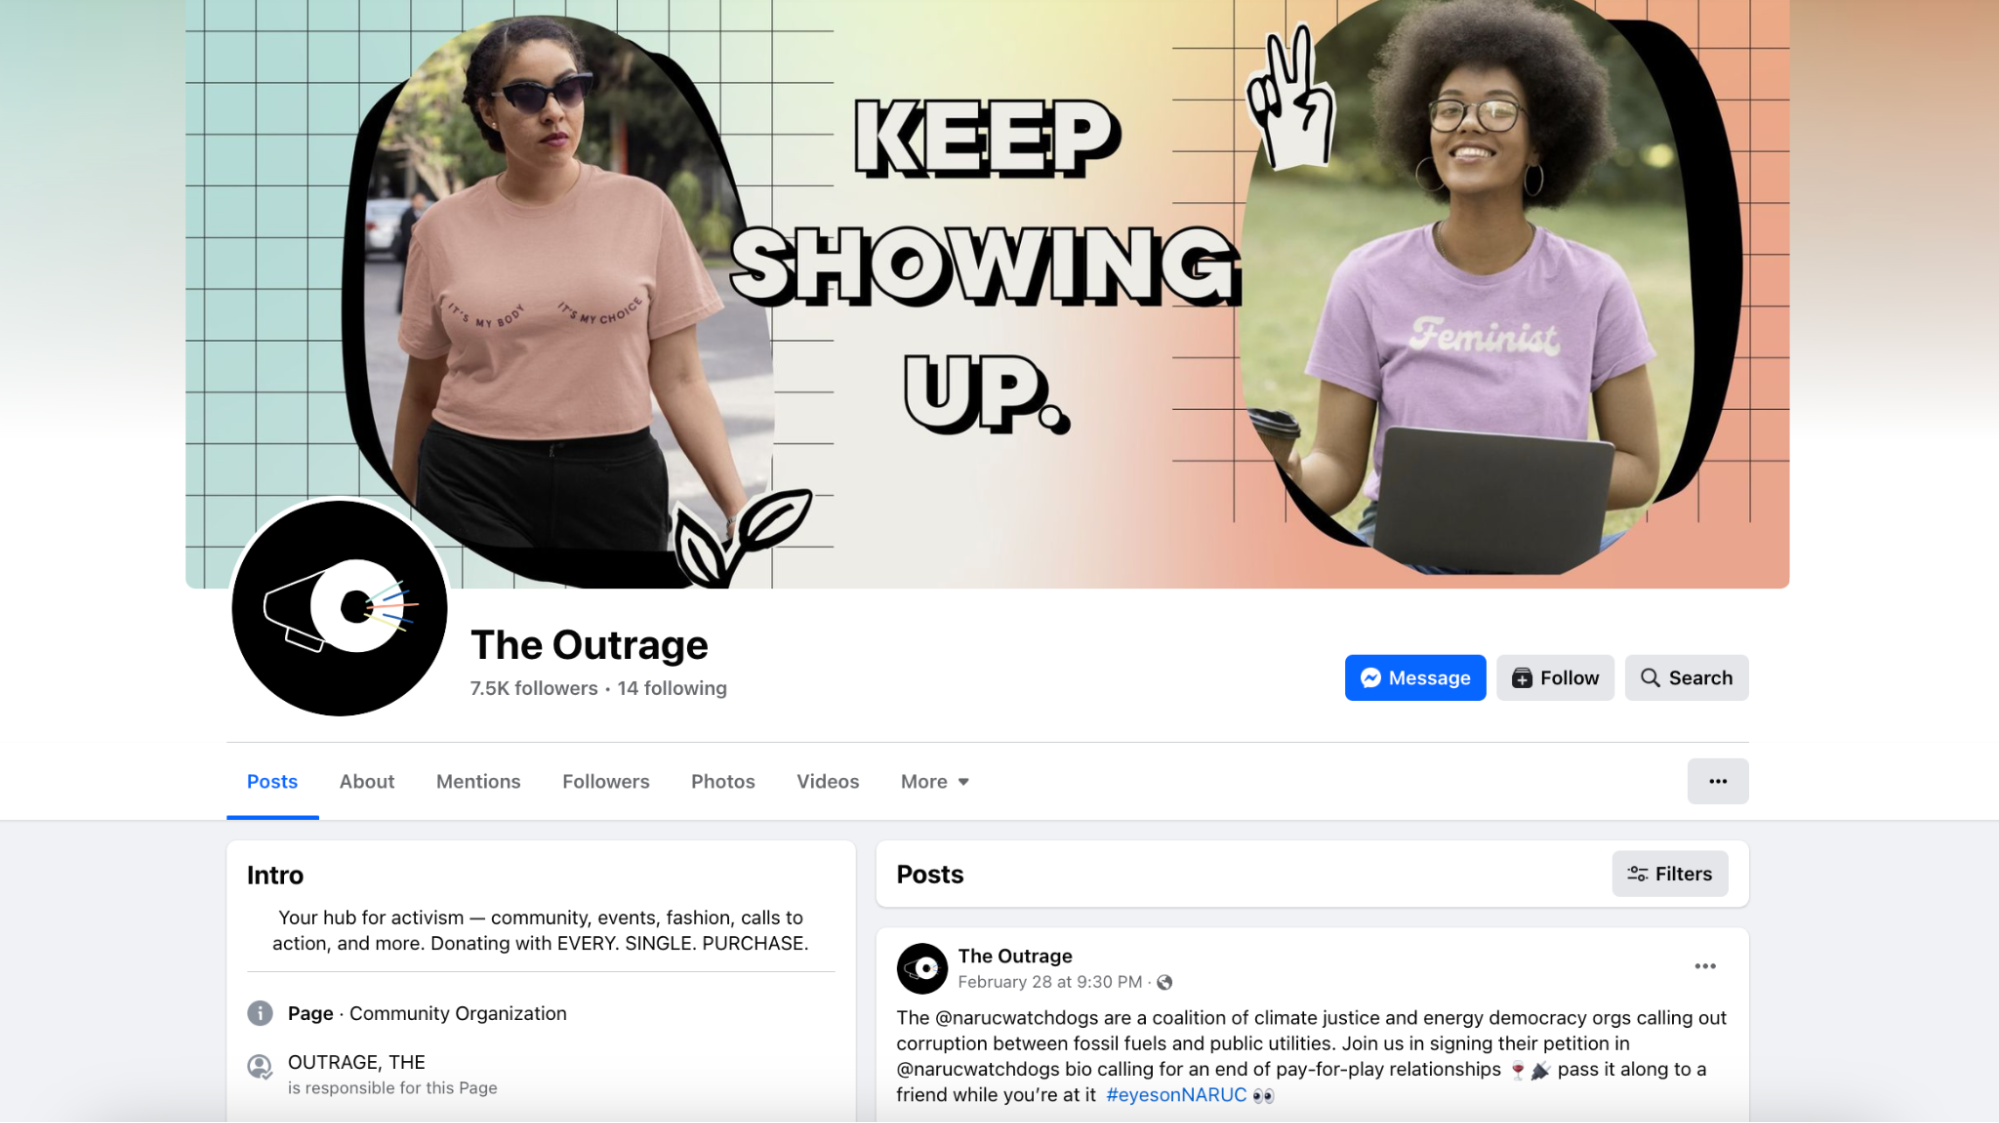 The Outrage’s Facebook page.